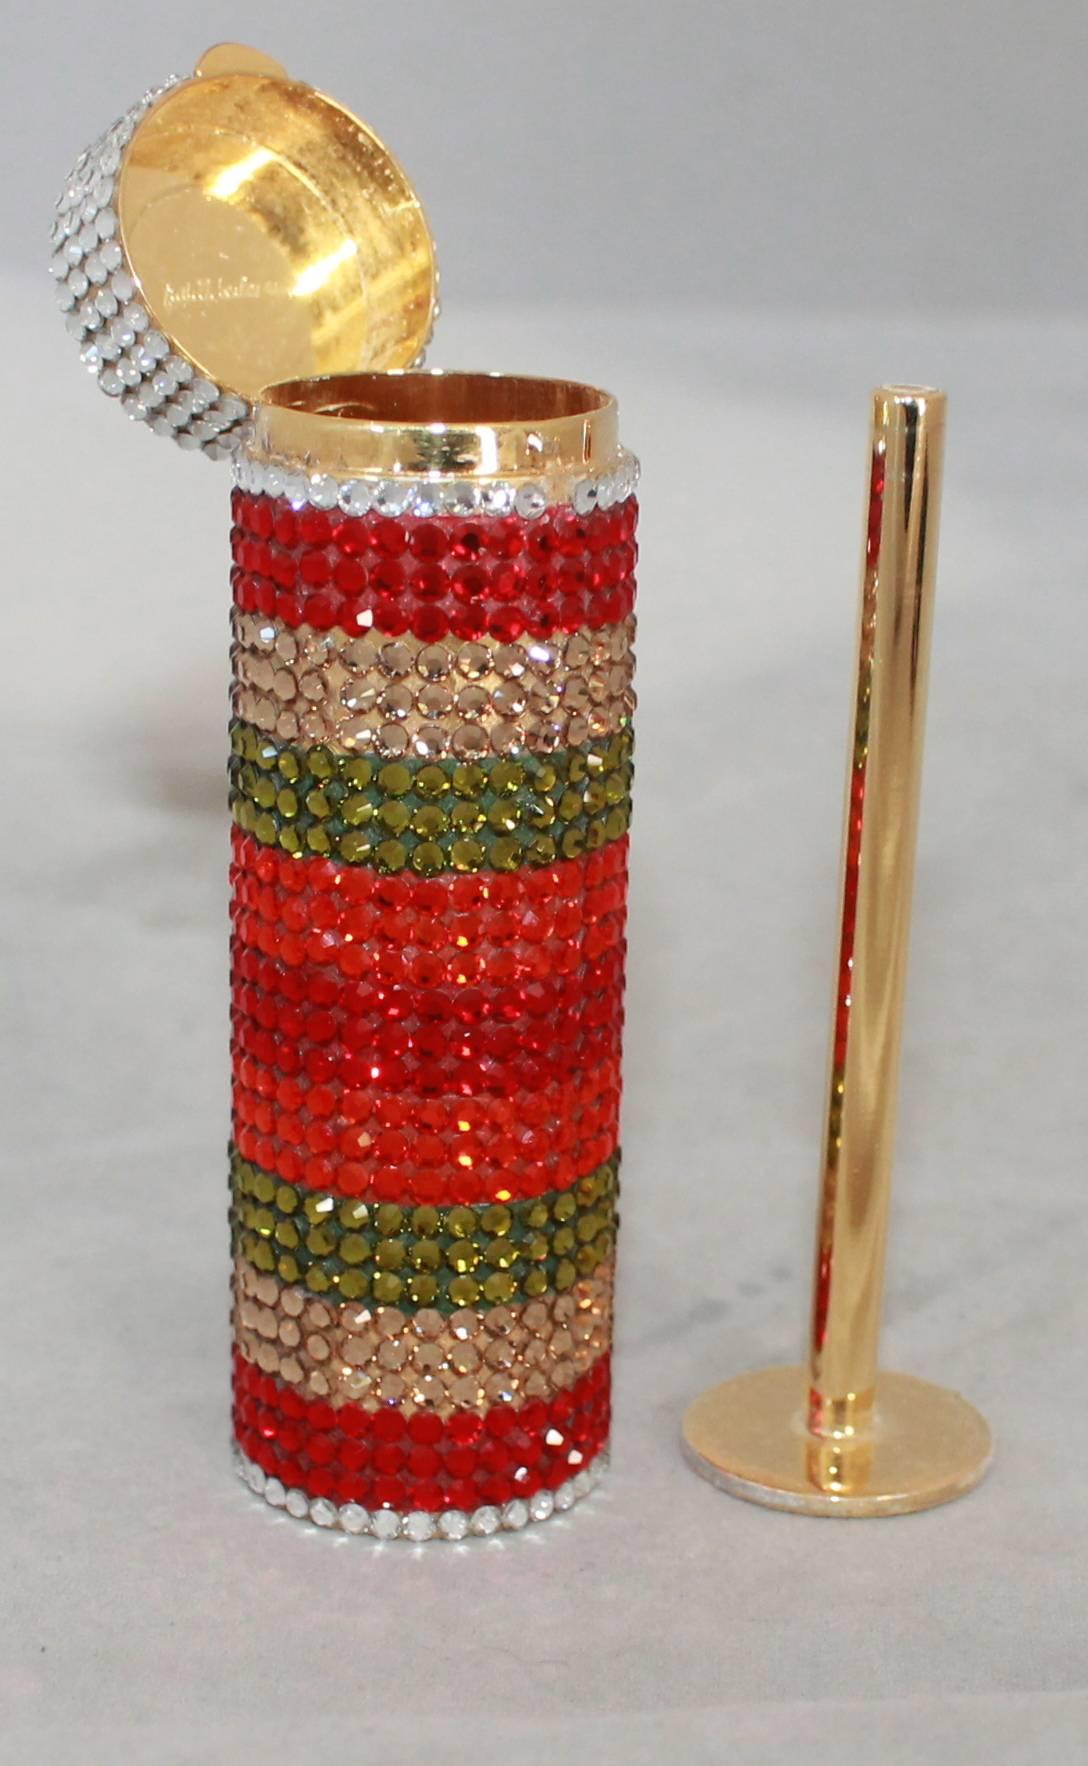 Judith Leiber 1990's Multi Colored Crystal Lifesavers Minaudiere  - GHW.  This beautiful piece is in very good vintage condition only missing a few rhinestones. This adorable Lifesavers Minaudiere  consists of red, orange, white, green, and